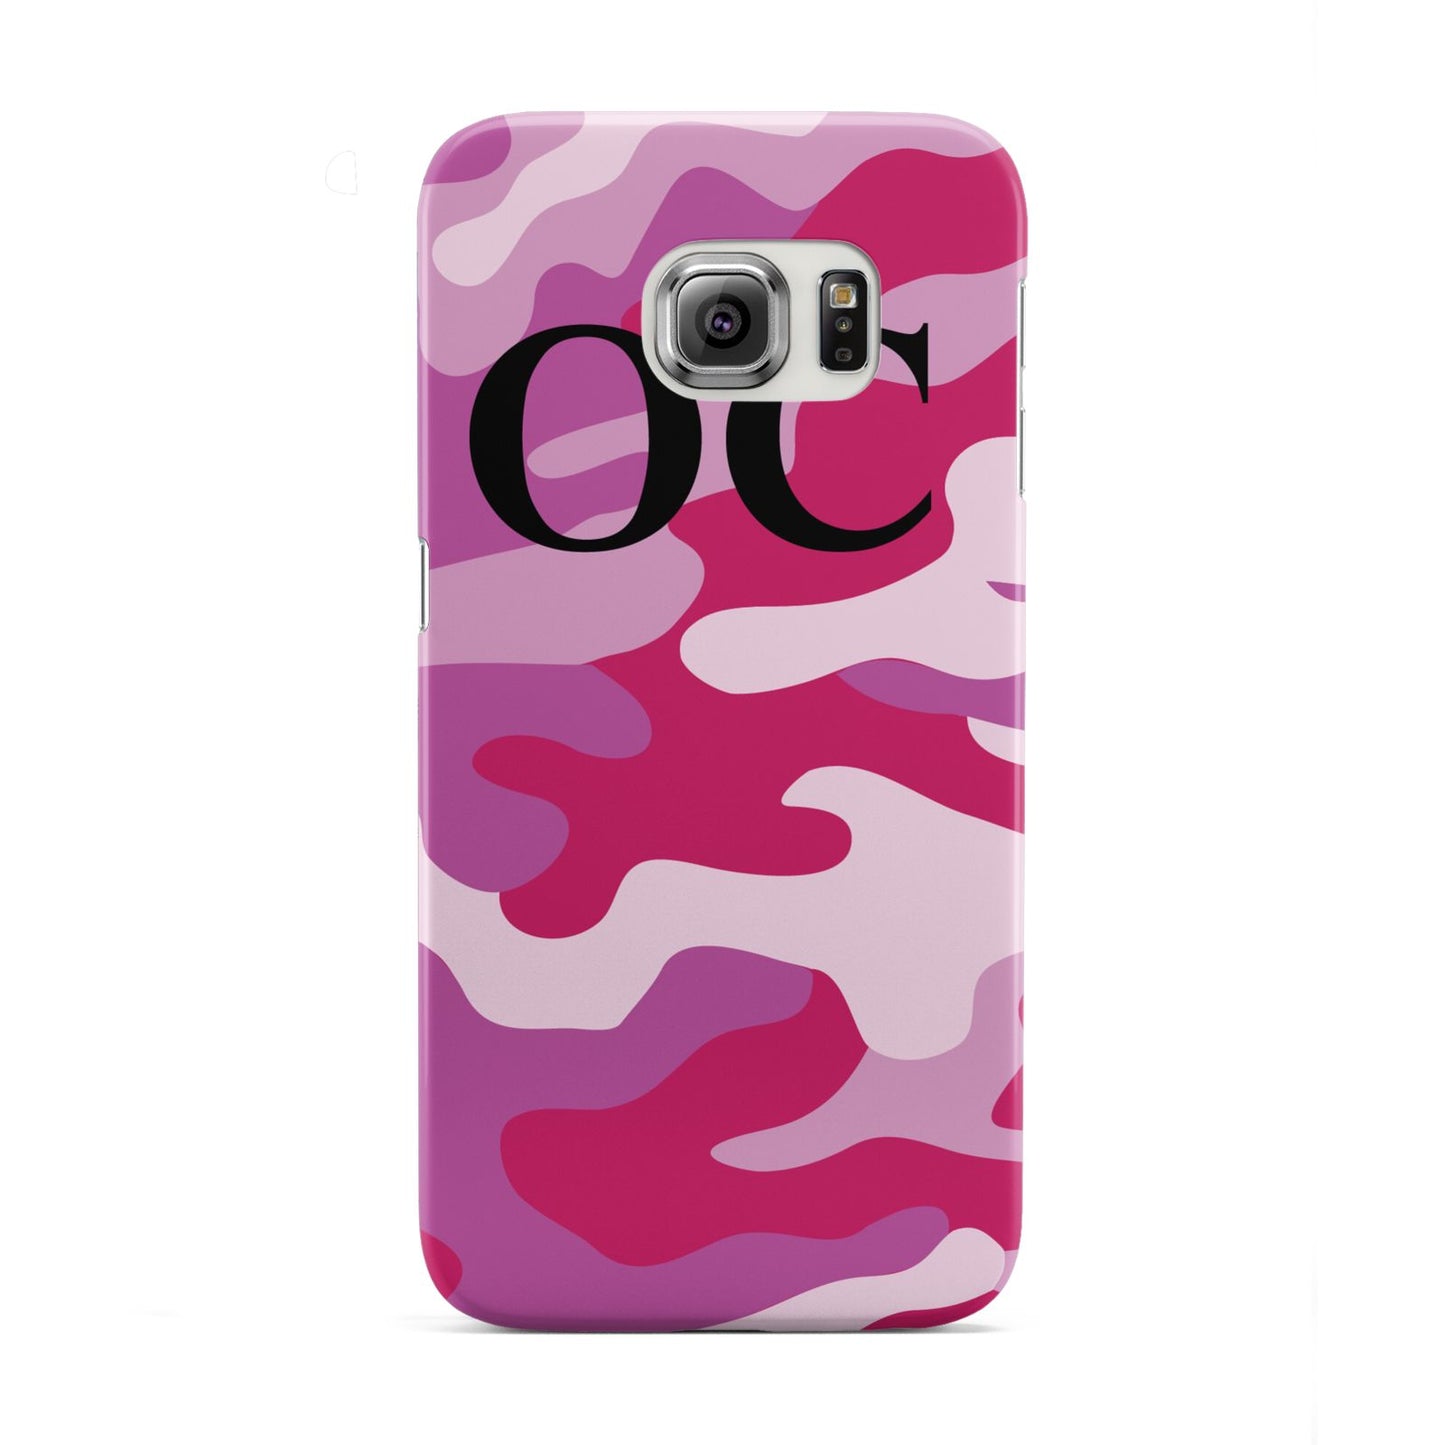 Camouflage Personalised Samsung Galaxy S6 Edge Case